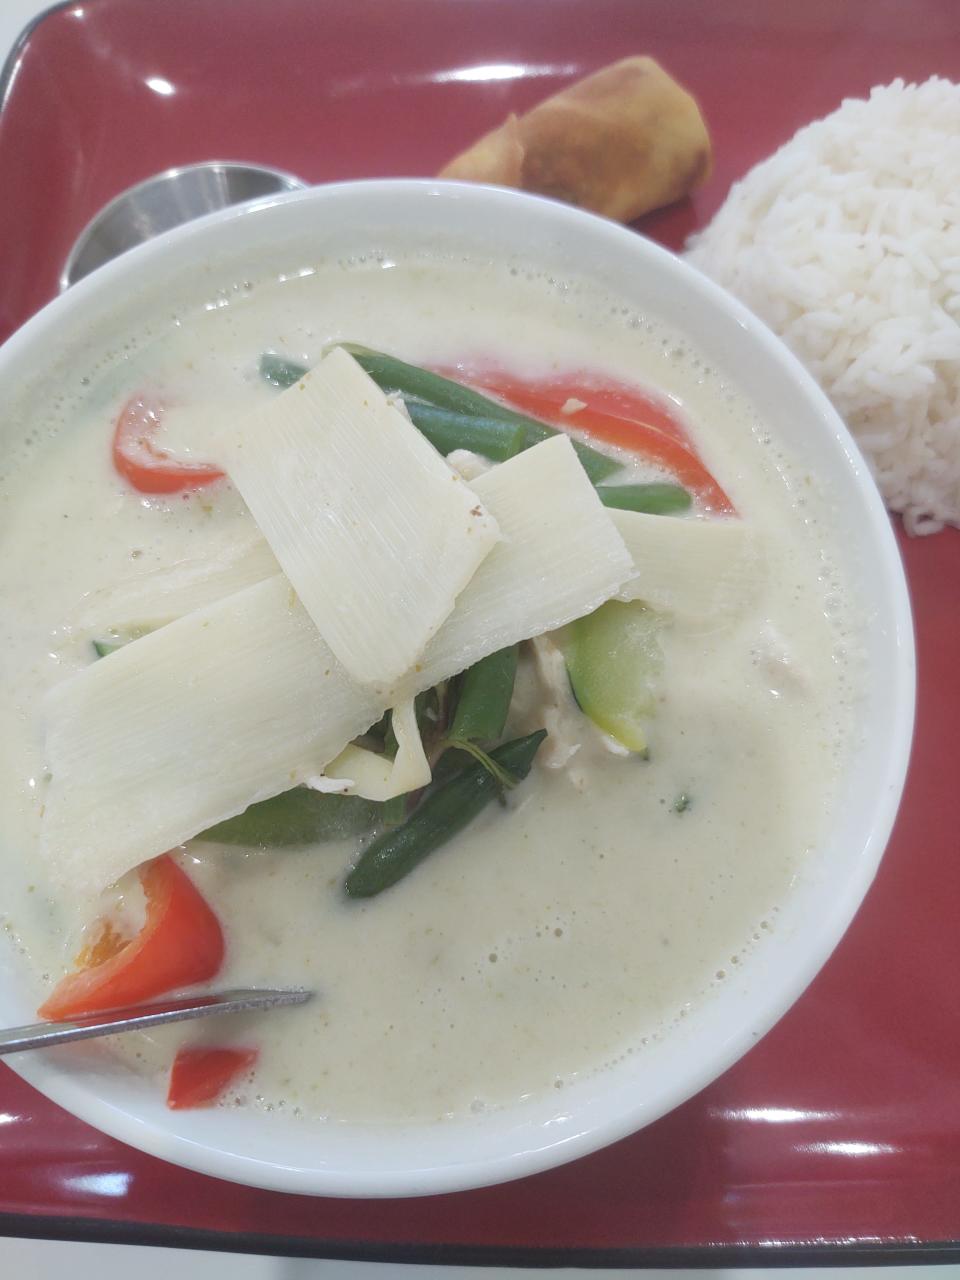 At JaneJira in Vero Beach, the green curry chicken was sublime and velvety with wonderful, complex flavors that would satisfy and delight any Thai food aficionado.